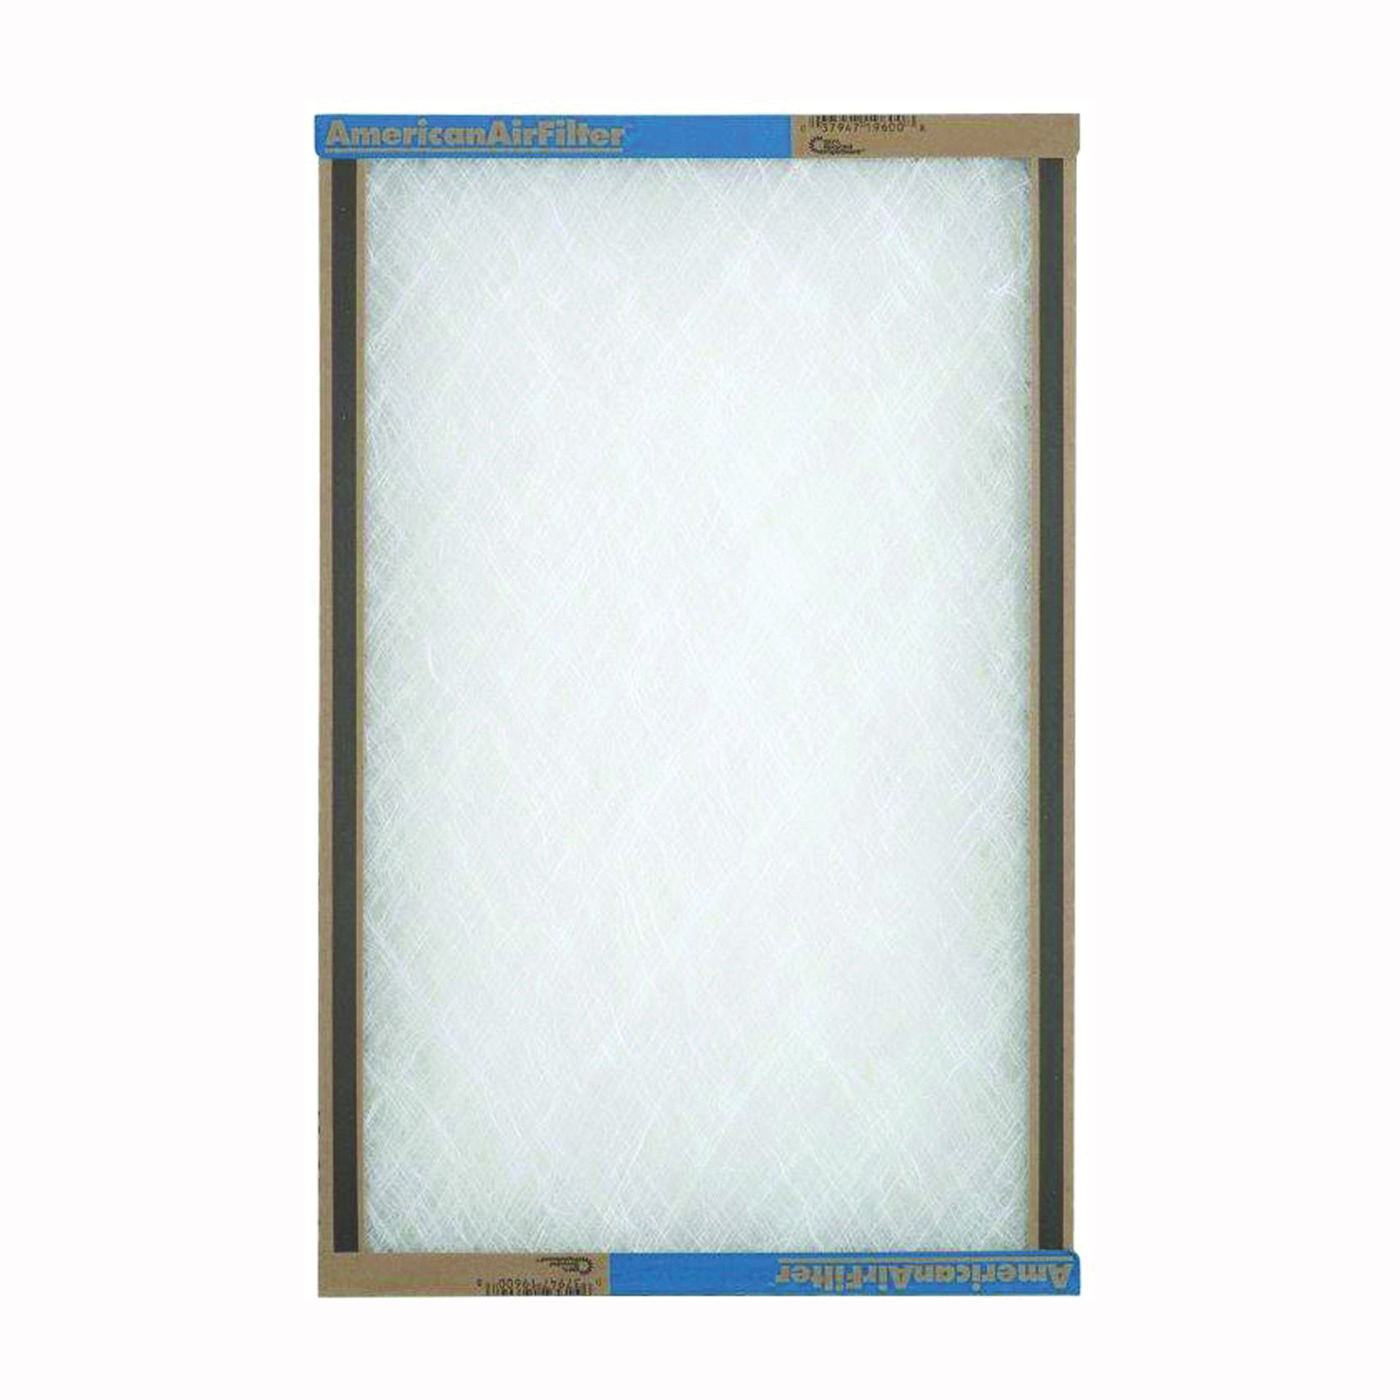 220-700-051 Panel Filter, 20 in L, 20 in W, Chipboard Frame